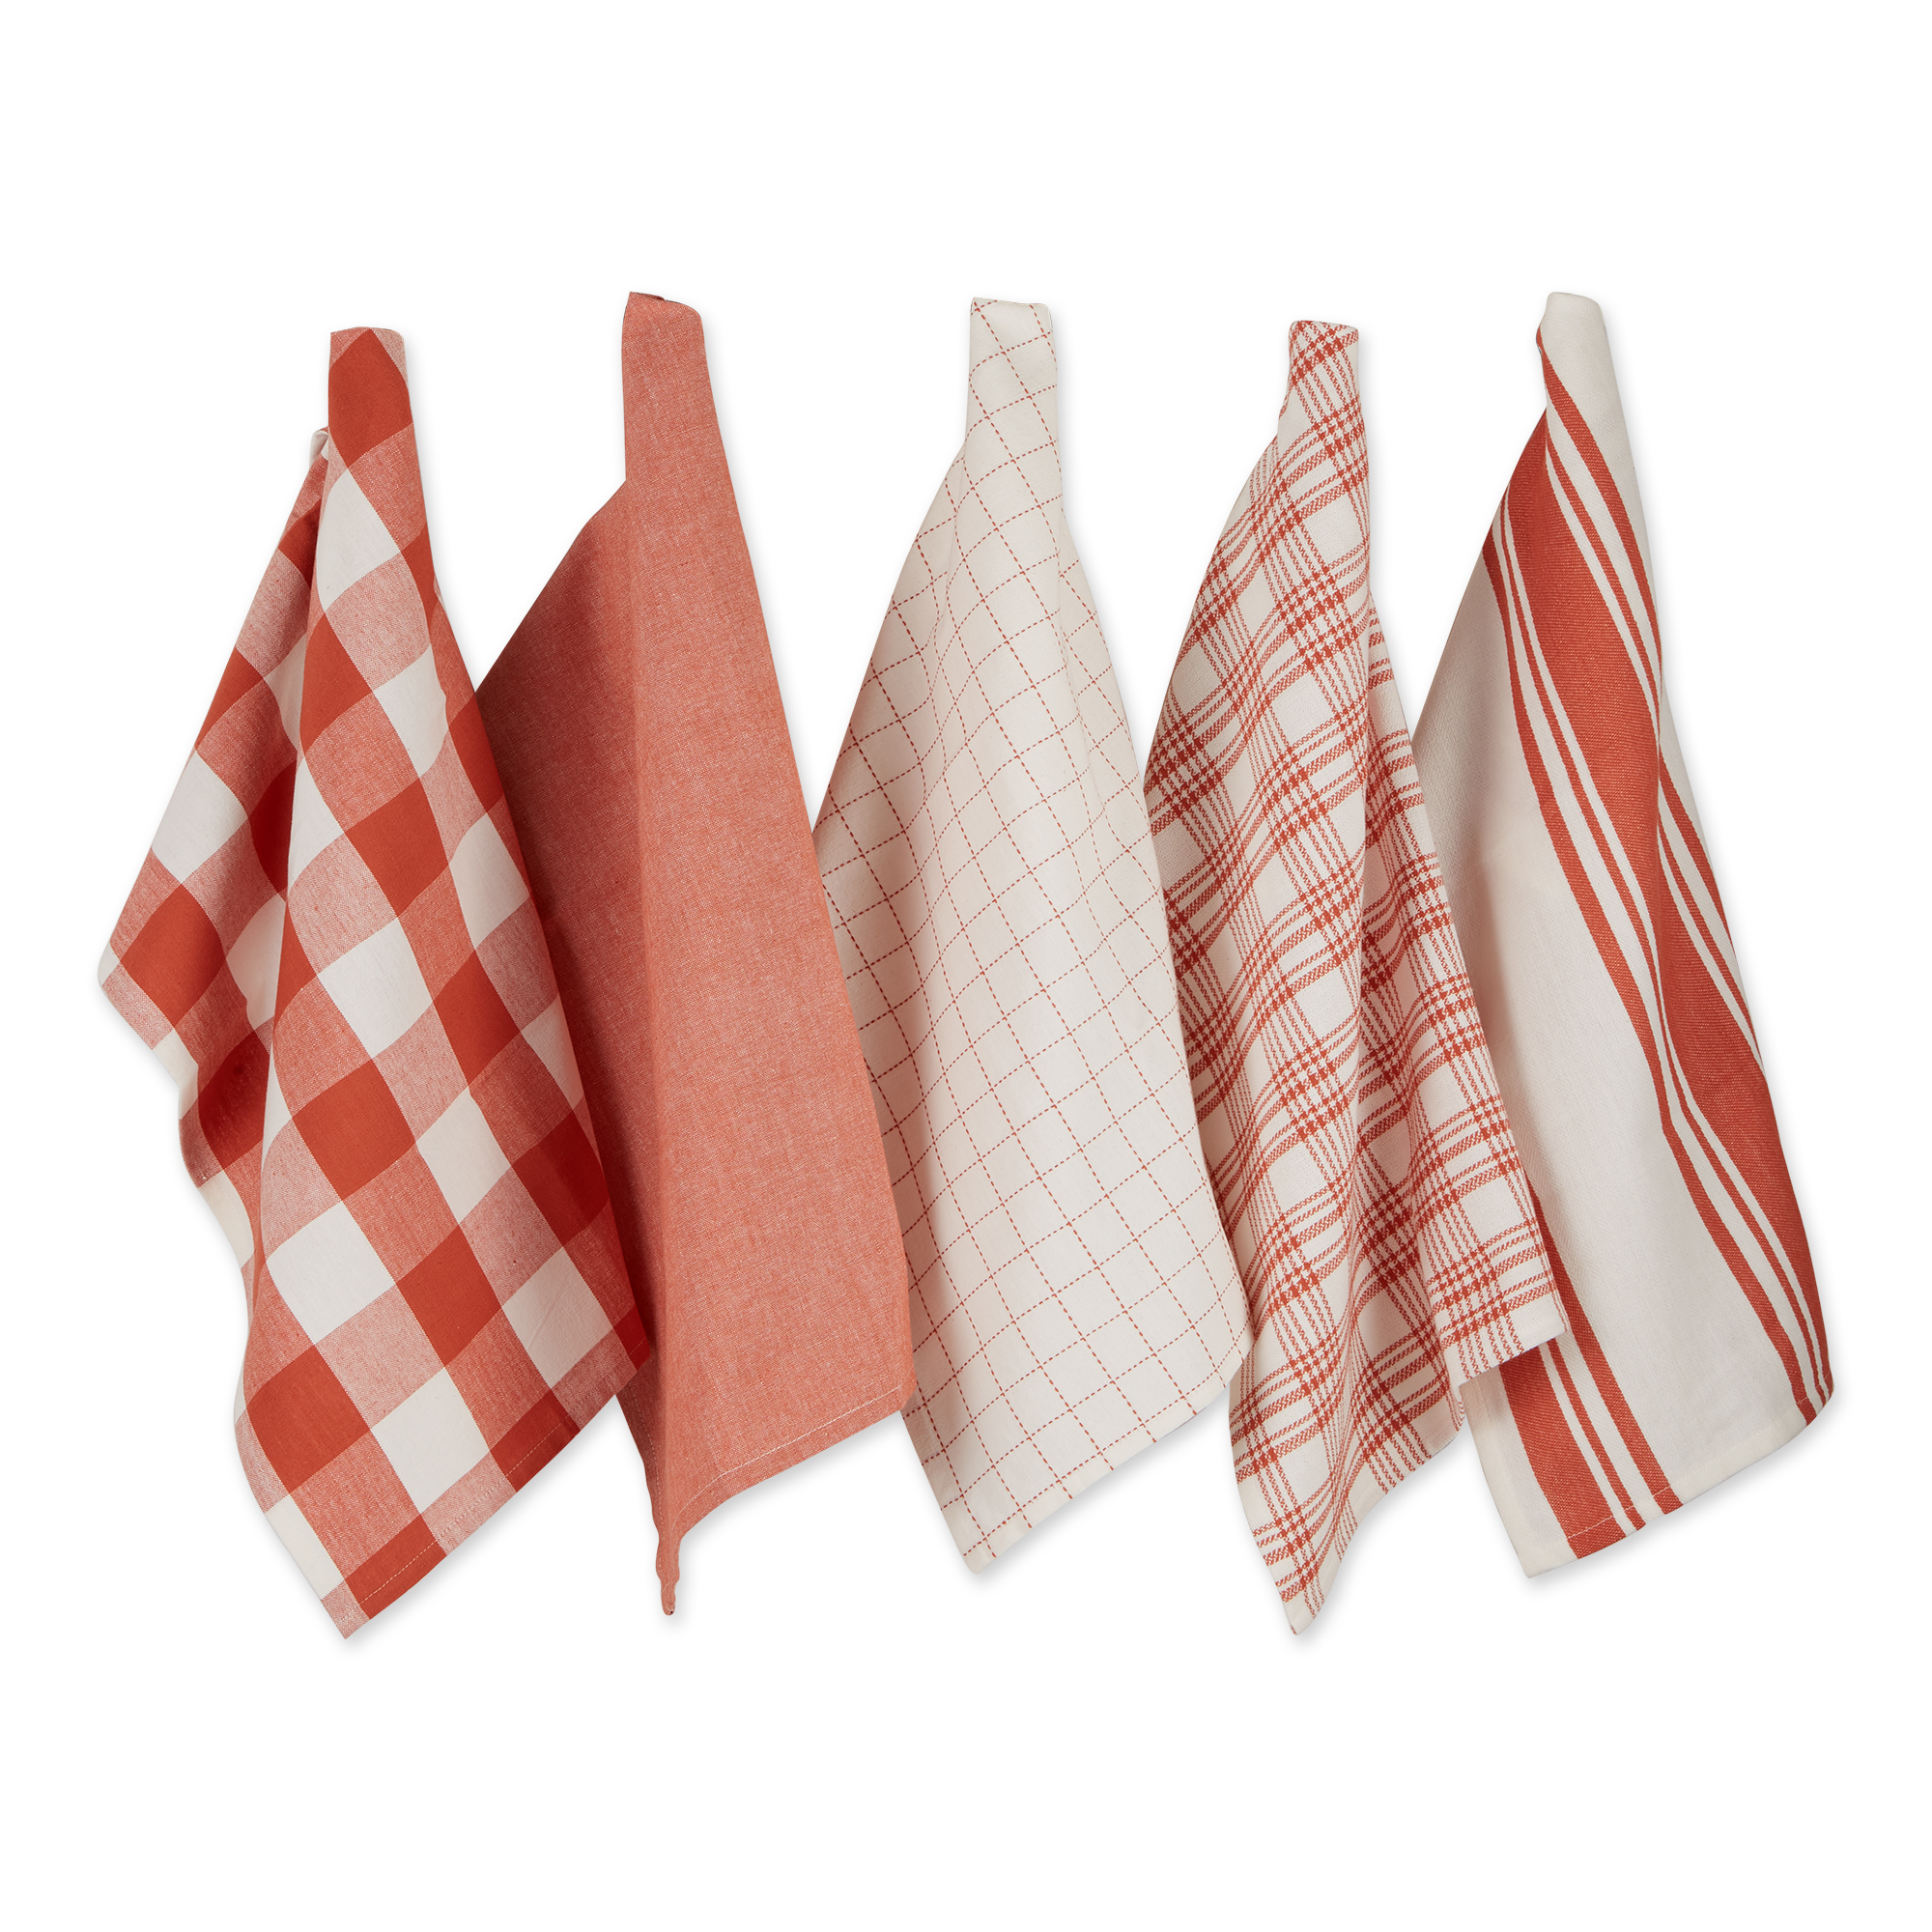 DII Midwest Design Imports Design Imports CAMZ12332 18 x 28 in. Assorted Vintage Red Everyday Dishtowel - Set of 5